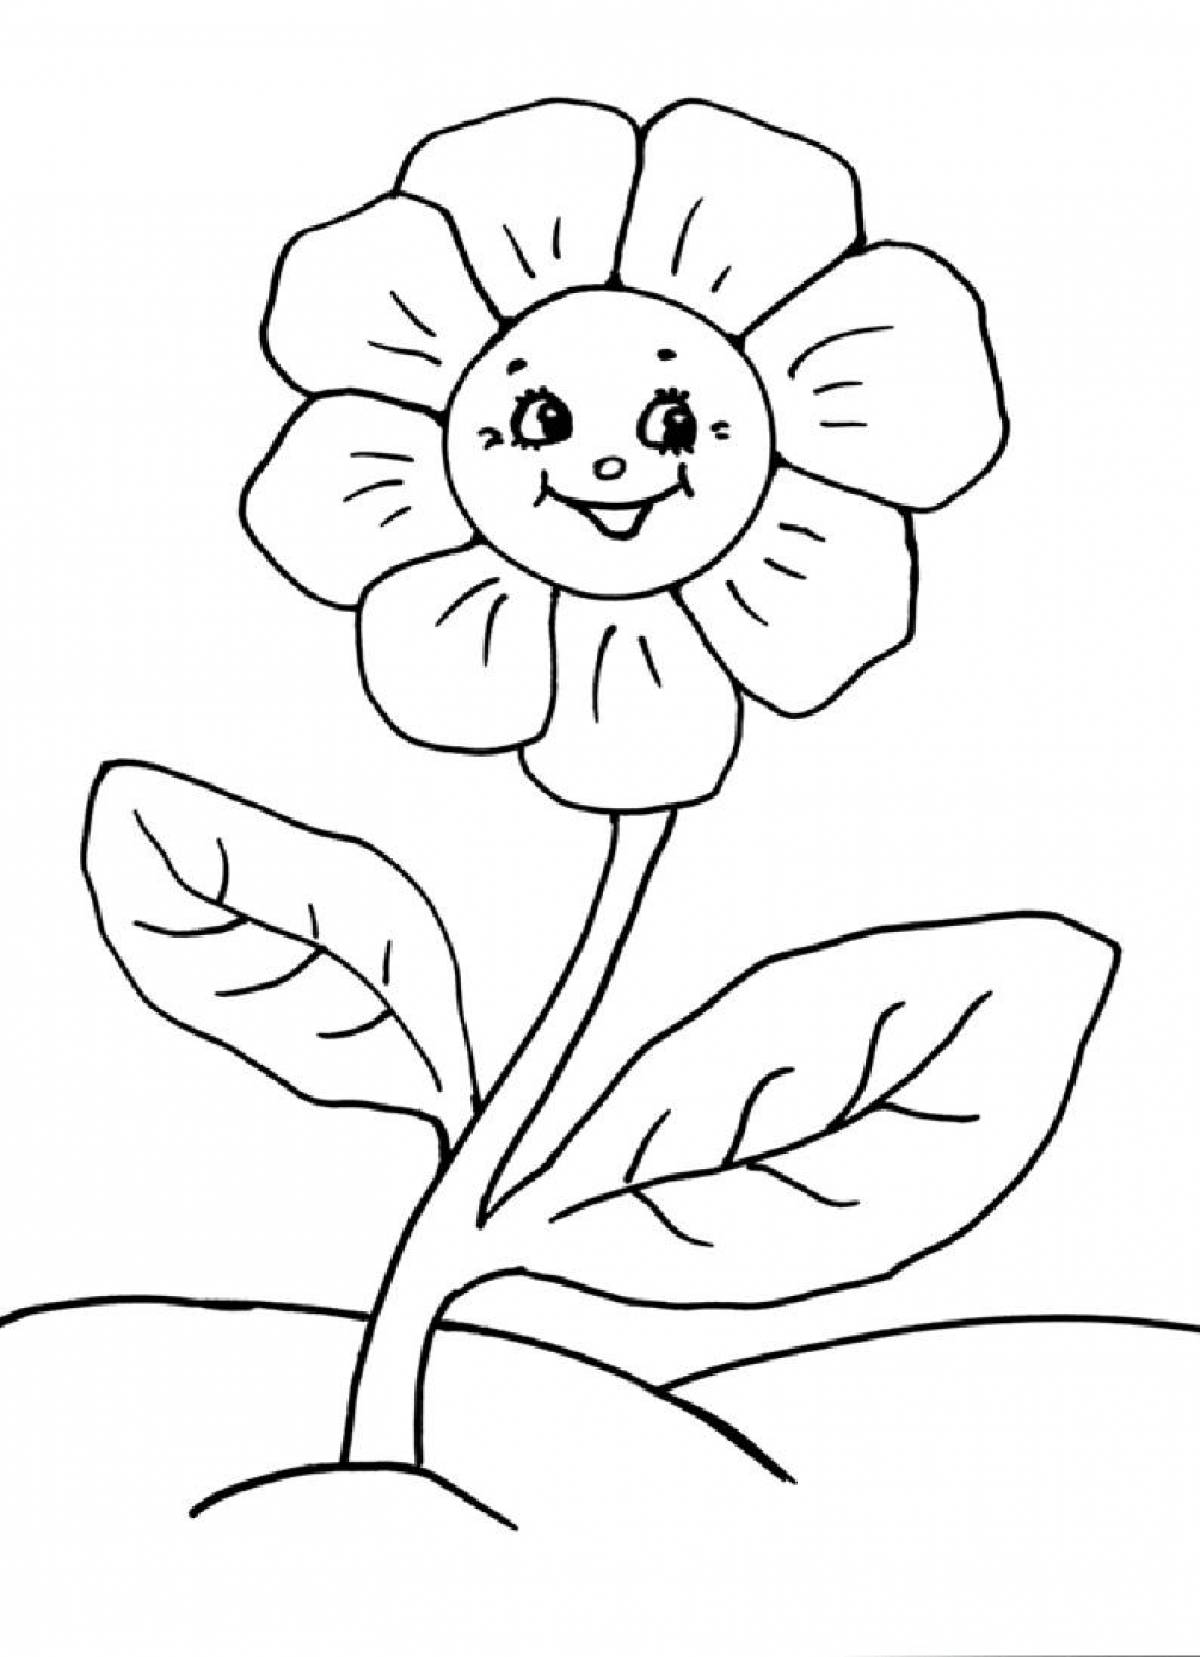 Fancy coloring flower for 3-4 year olds